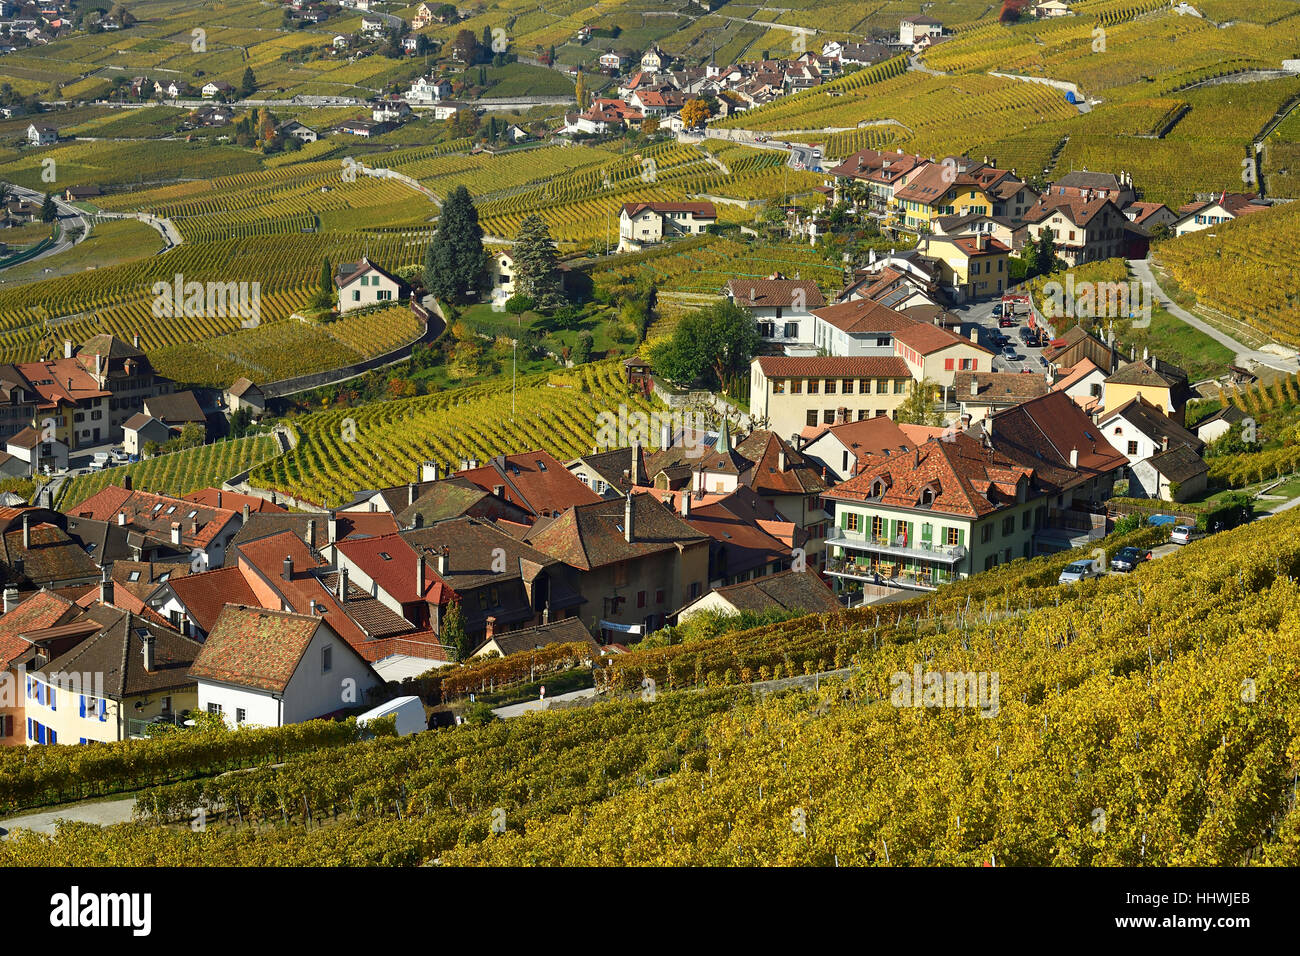 Vineyards in autumn with view of winemaking villages Epesses and Riex, Lavaux, Canton of Vaud, Switzerland Stock Photo